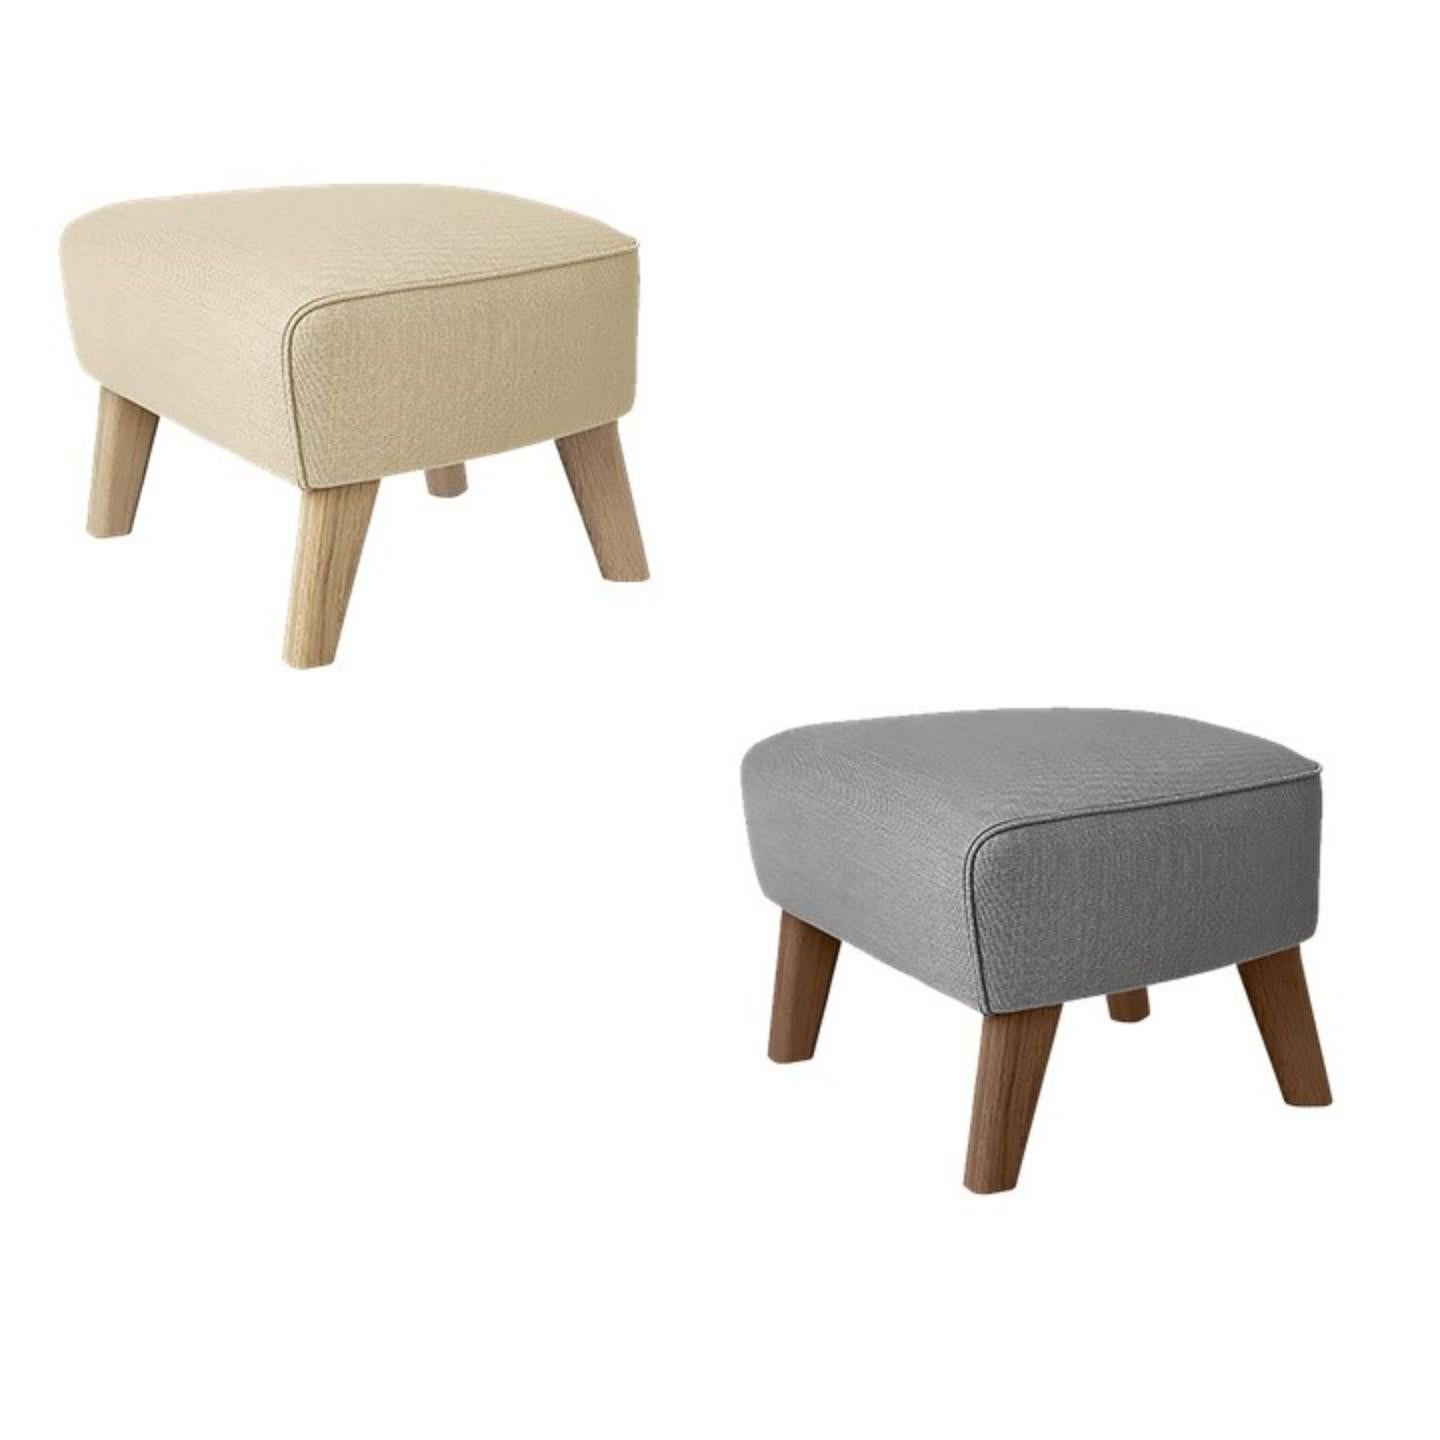 Other Set of 2 Beige and Smoked Oak Sahco Zero Footstool by Lassen For Sale